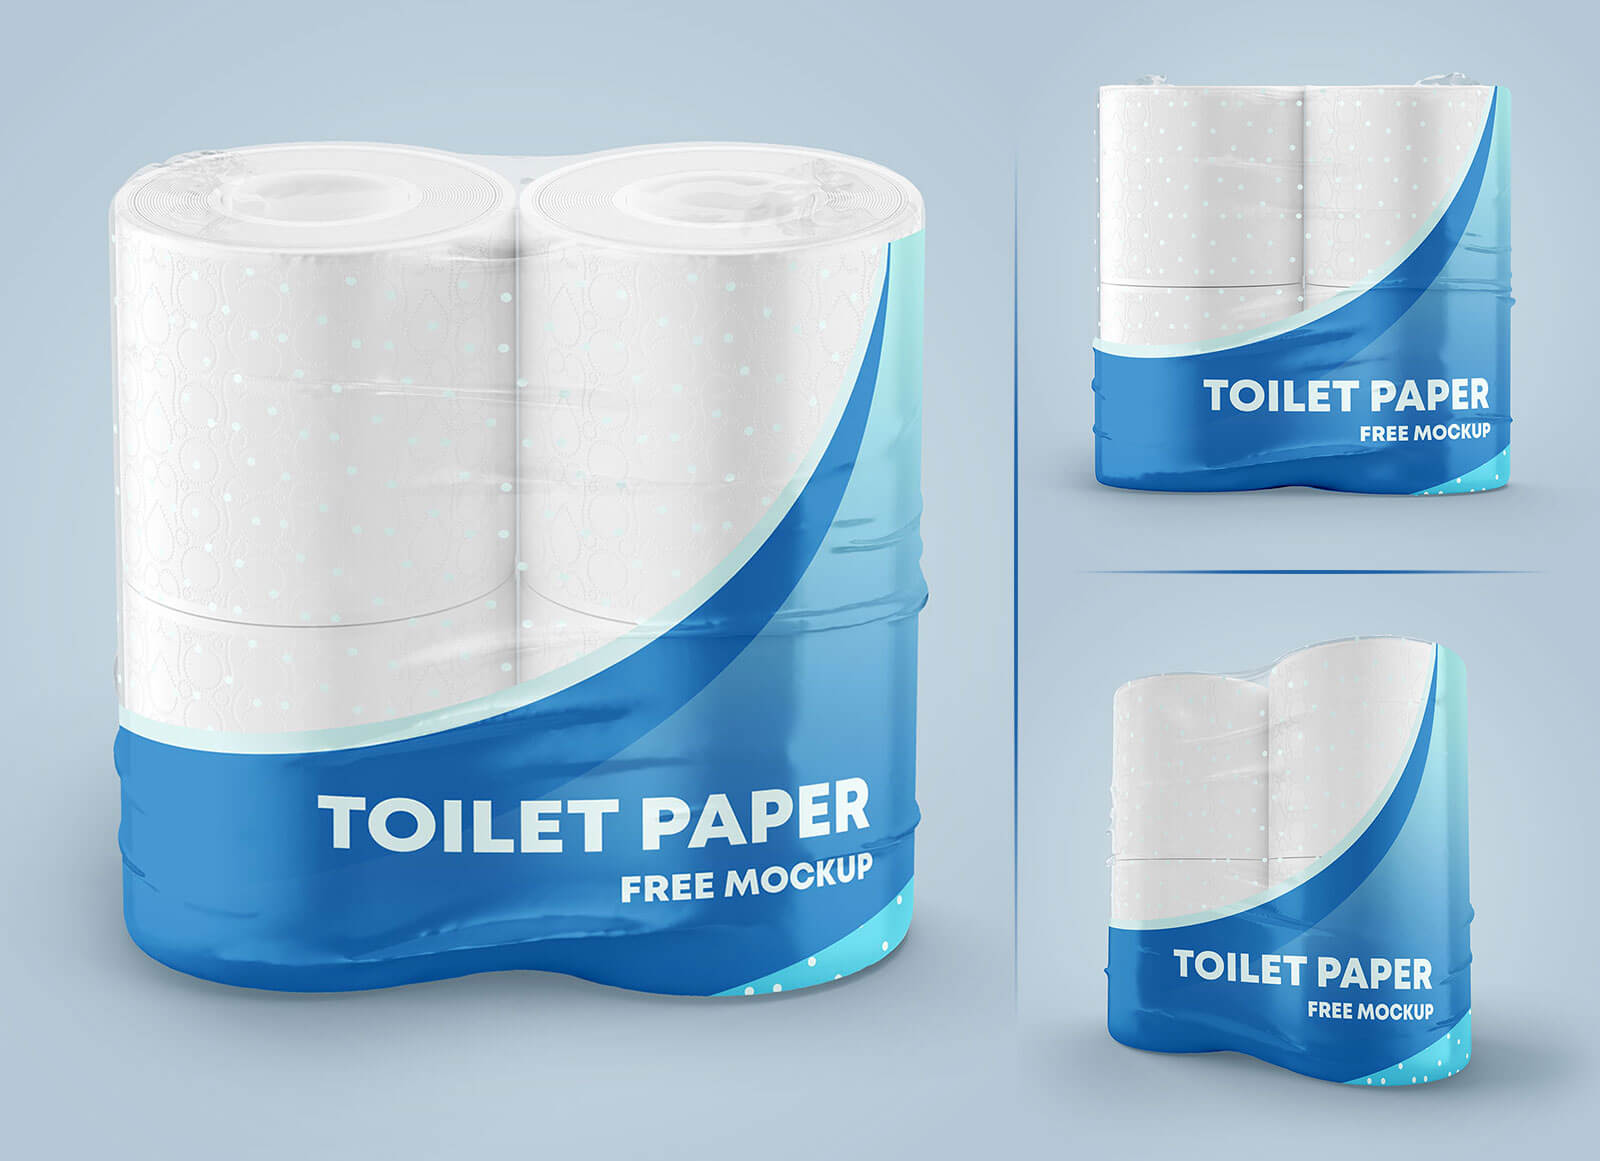 Free Wrapping Tissue Paper Mockup, Free Mockup PSD